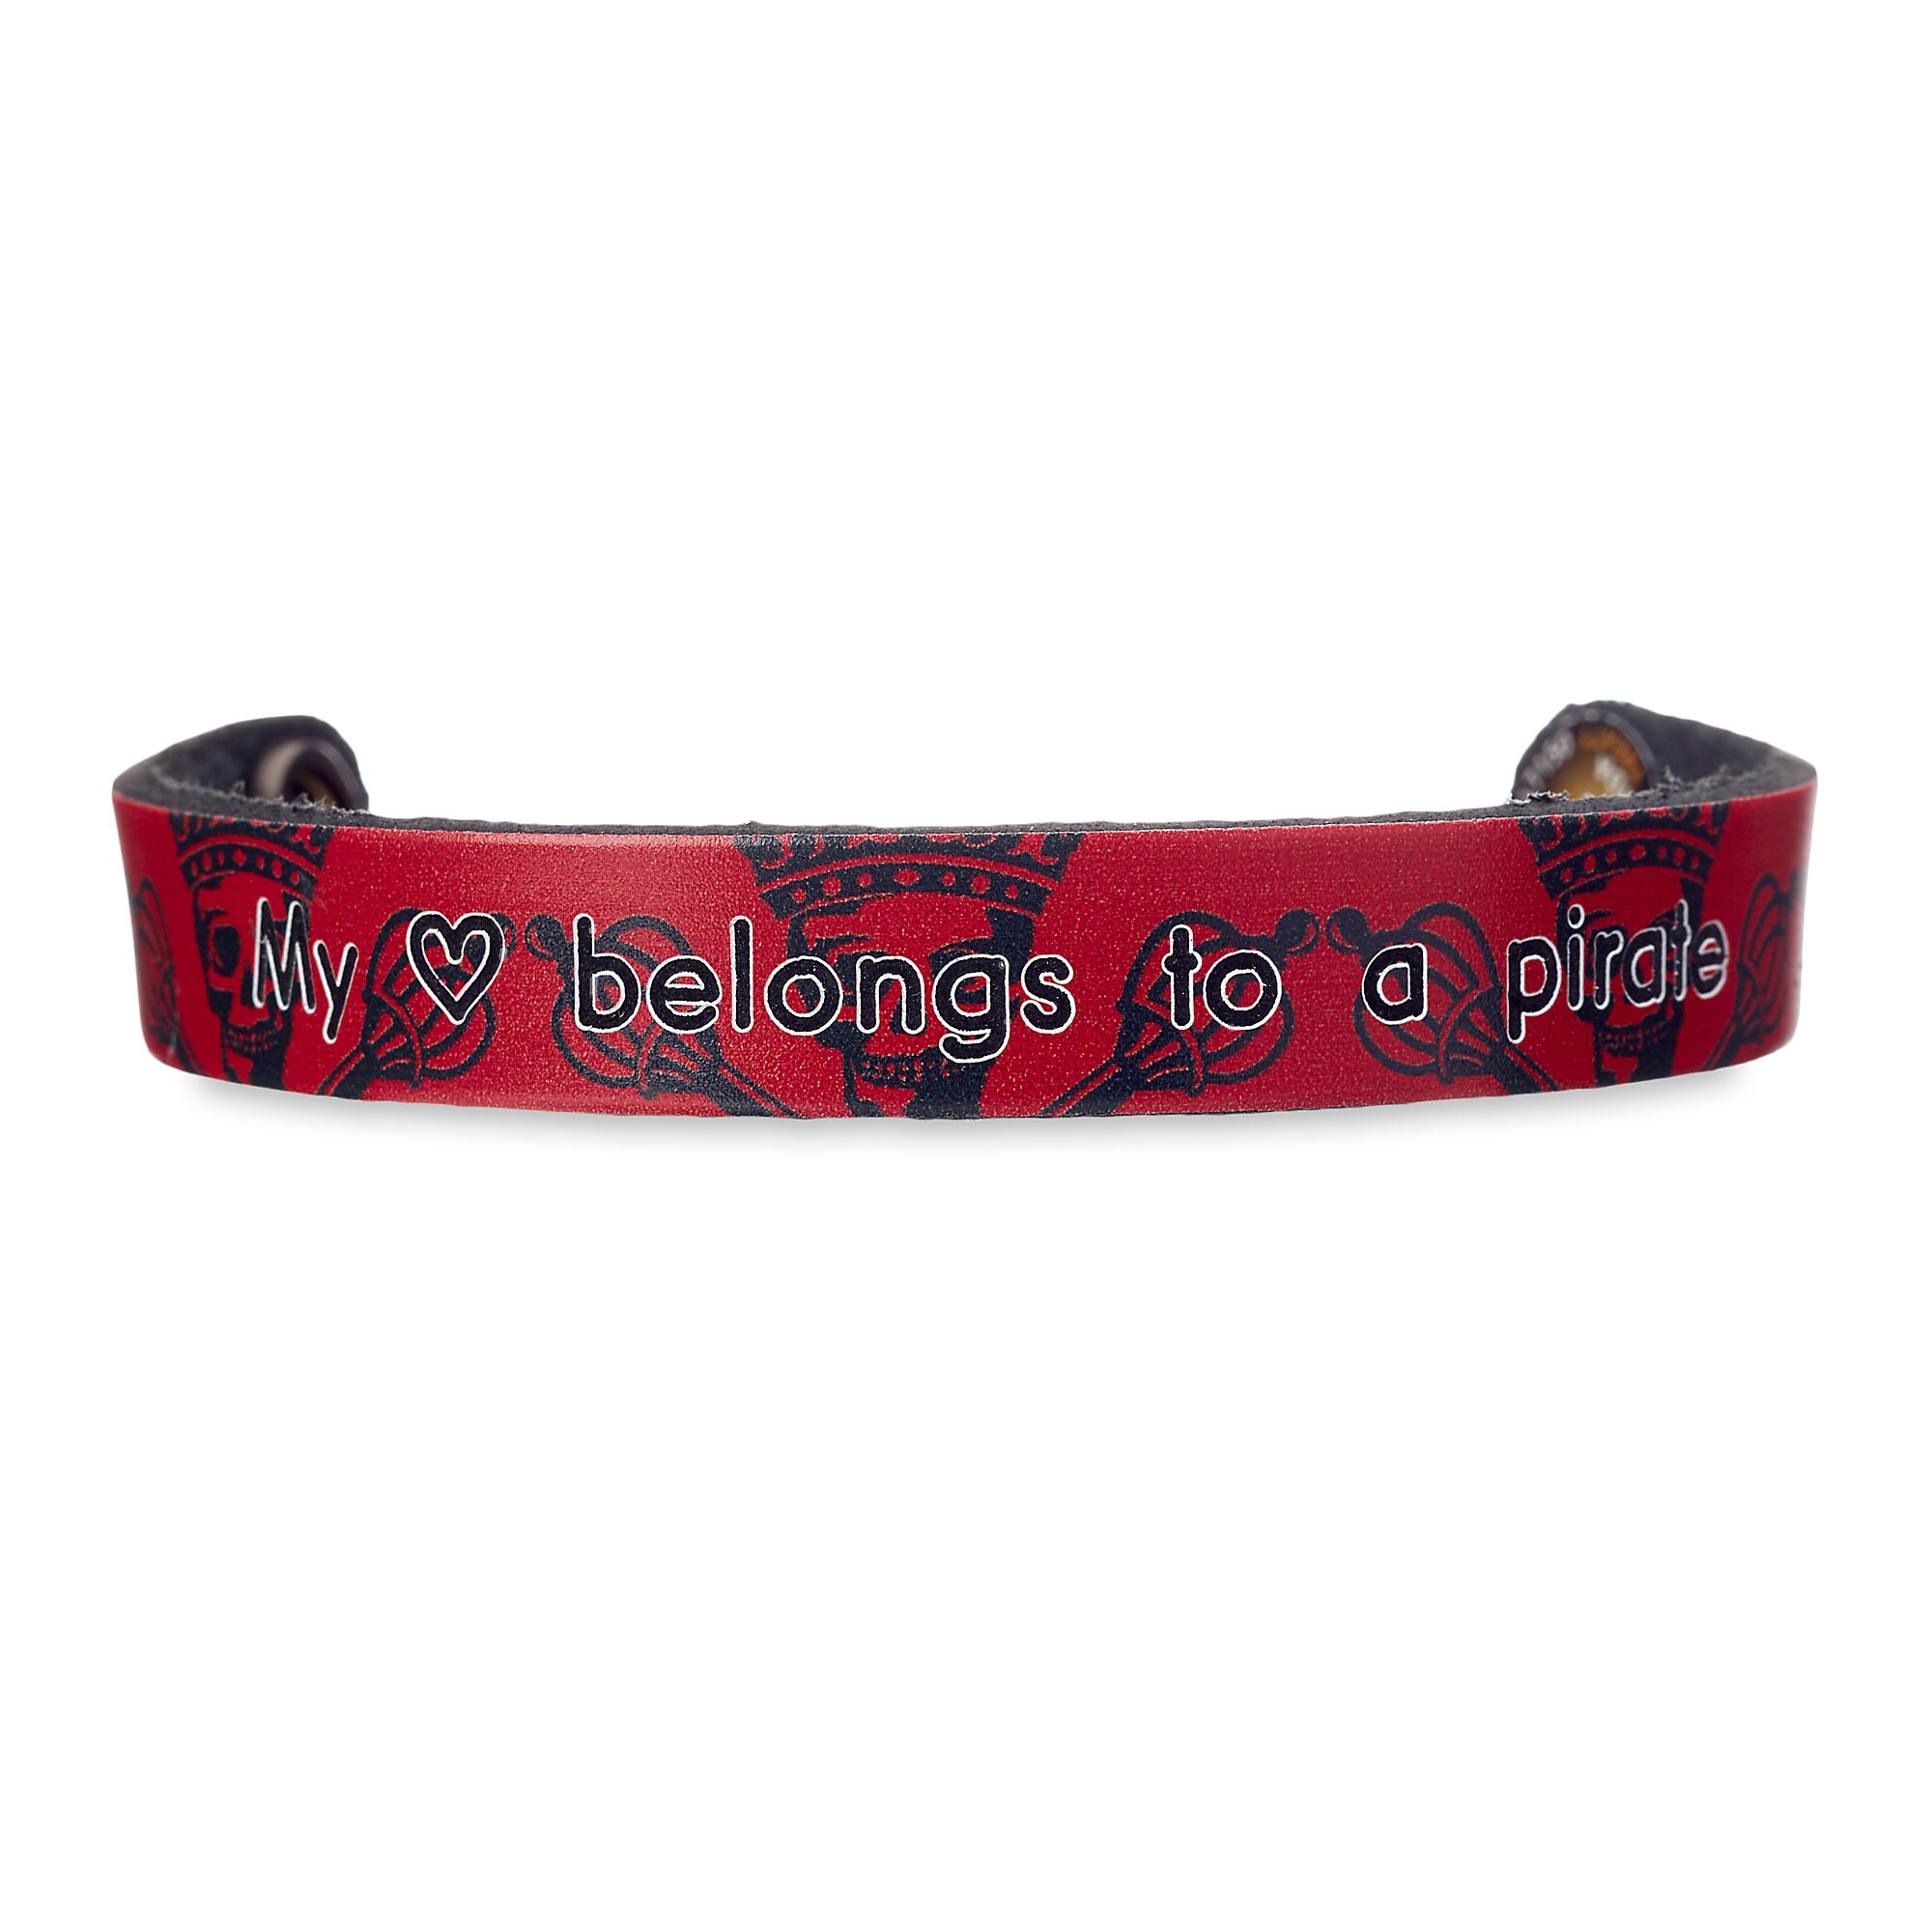 Pirates of the Caribbean Skull Leather Bracelet - Personalizable